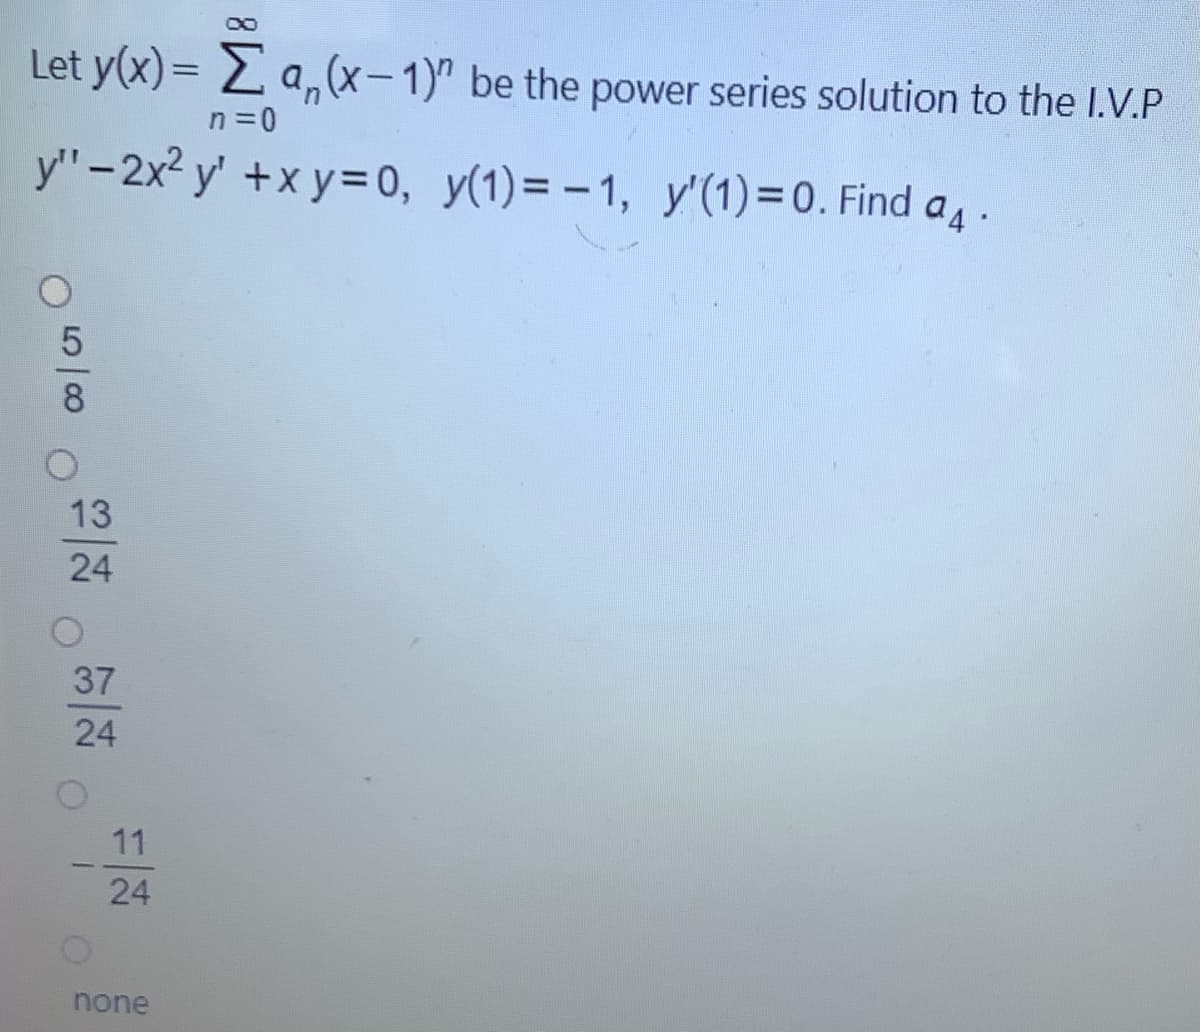 Let y(x)= 2 a,(x-1)" be the power series solution to the I.V.P
n =0
y" -2x2 y' +x y= 0, y(1)= - 1, y'(1)=0. Find a .
8
13
24
37
24
11
24
none
